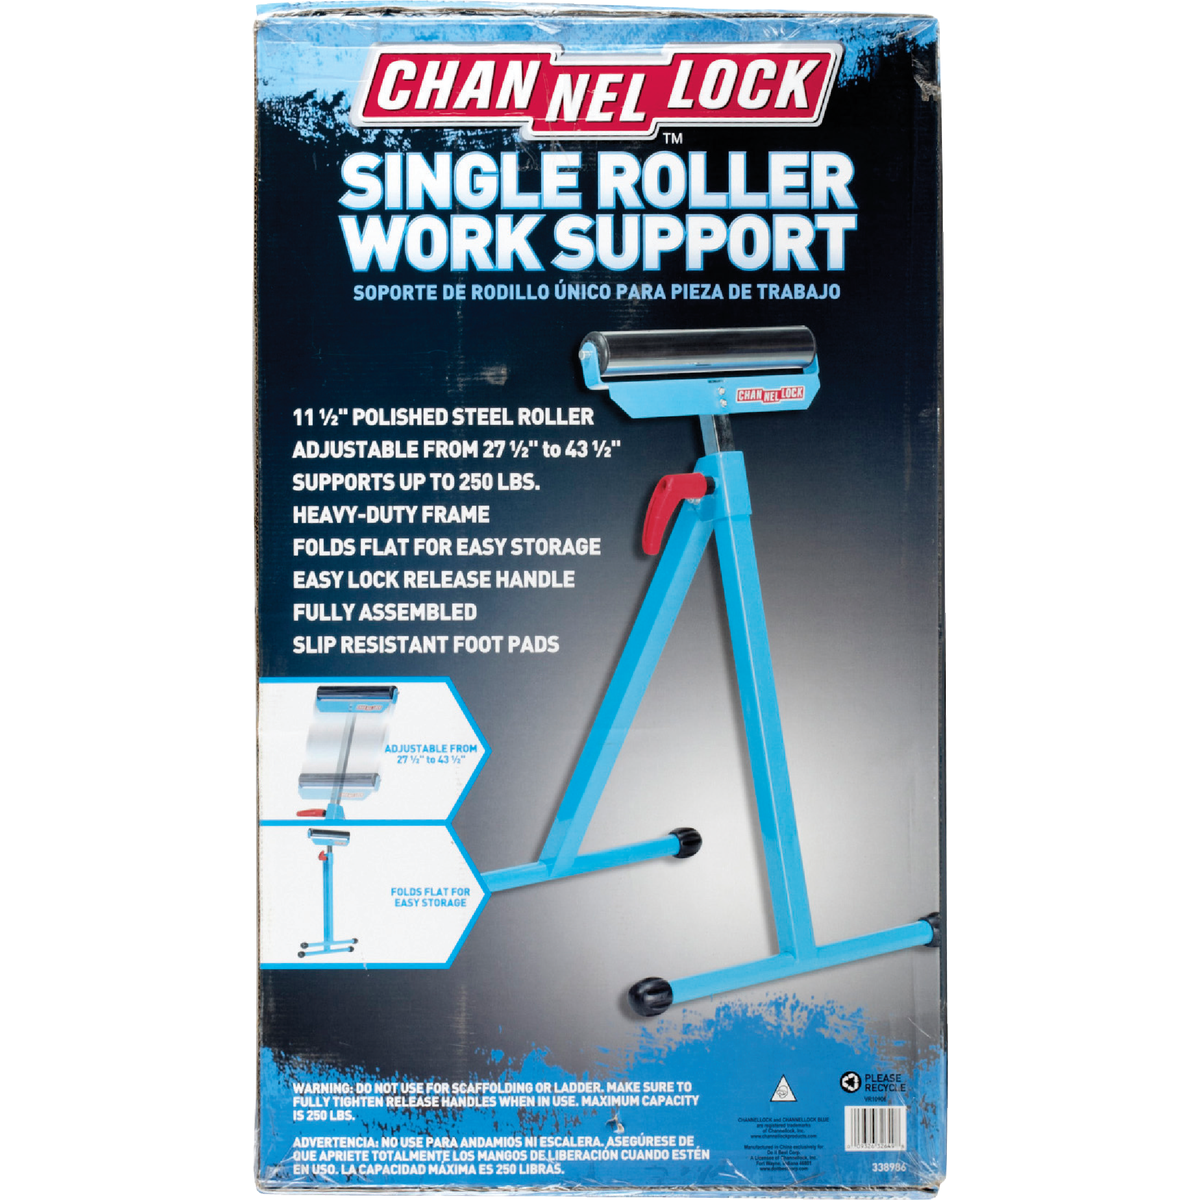 Workbenches, Sawhorses & Work Supports